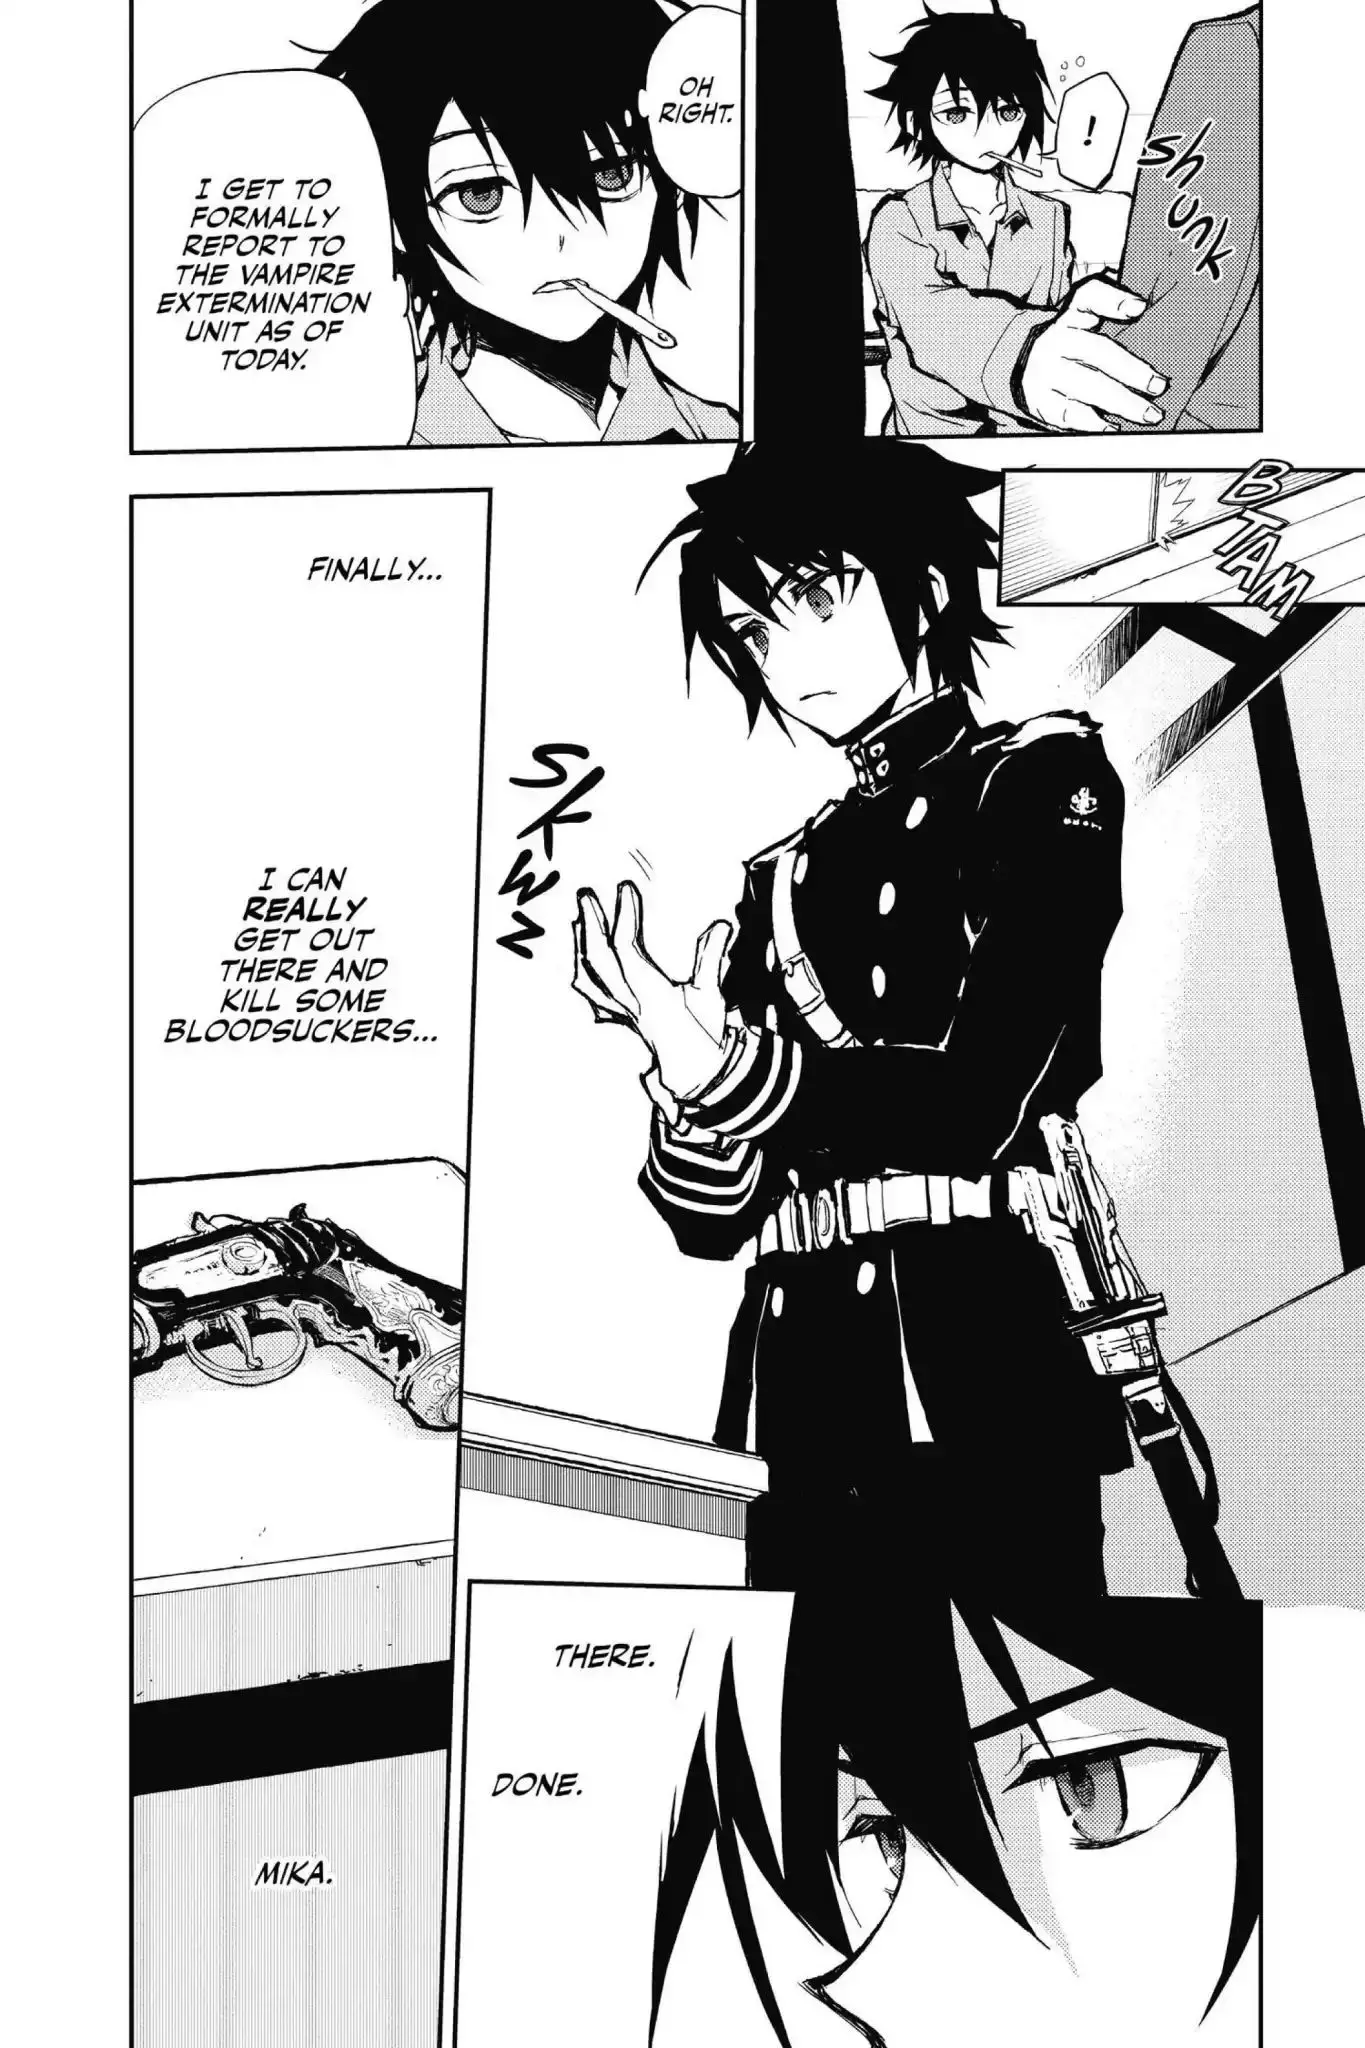 Seraph Of The End - 8 page 9-83683e4d